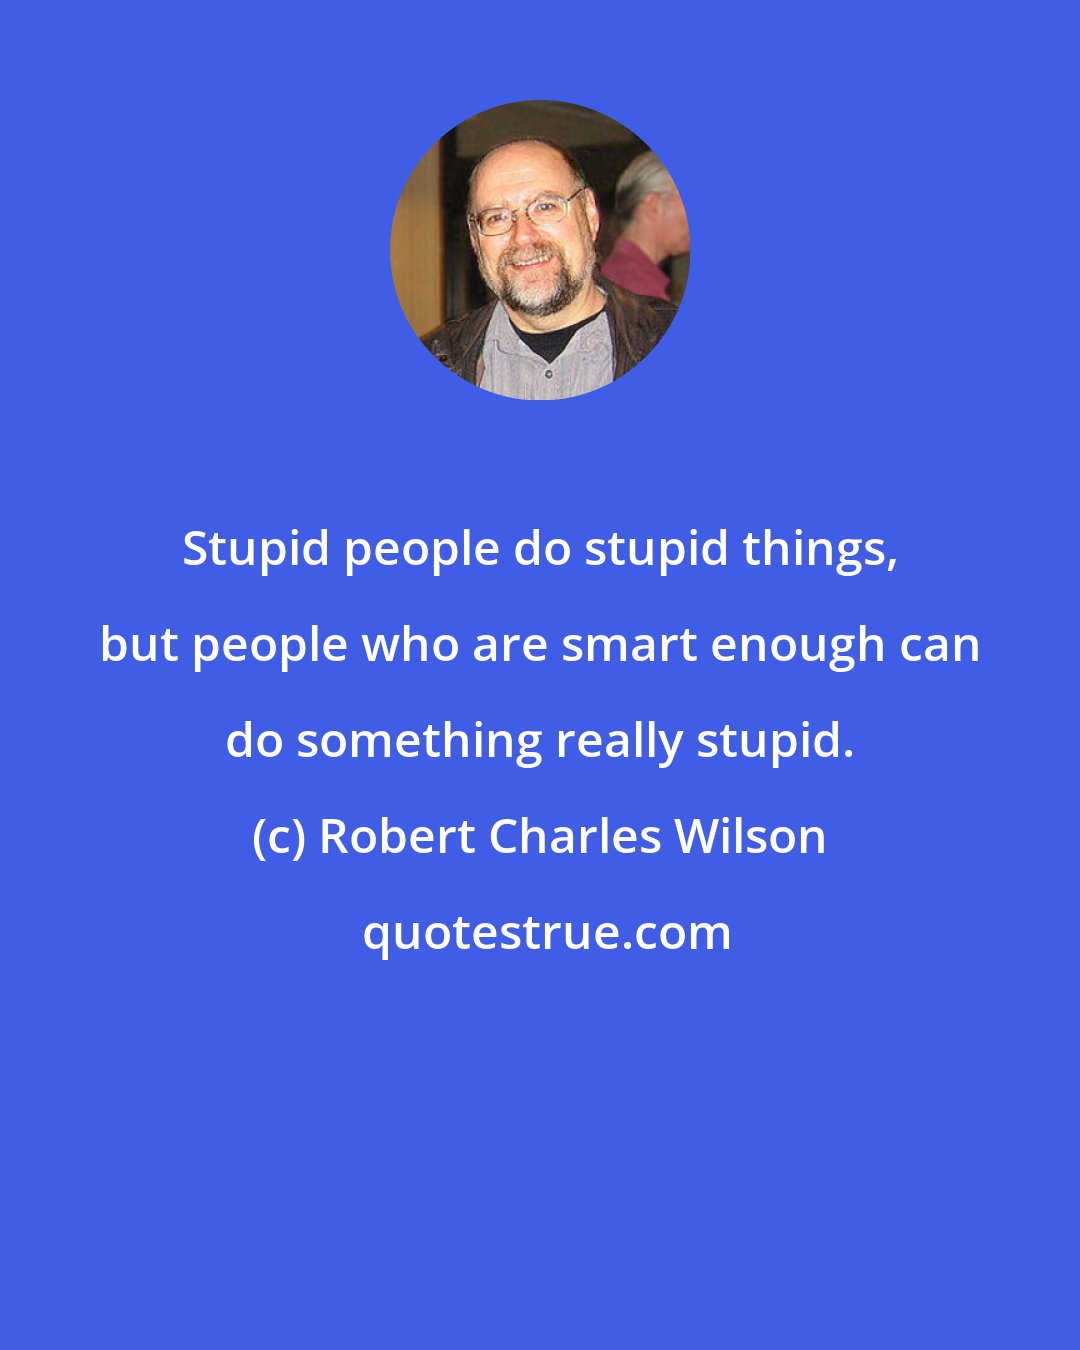 Robert Charles Wilson: Stupid people do stupid things, but people who are smart enough can do something really stupid.